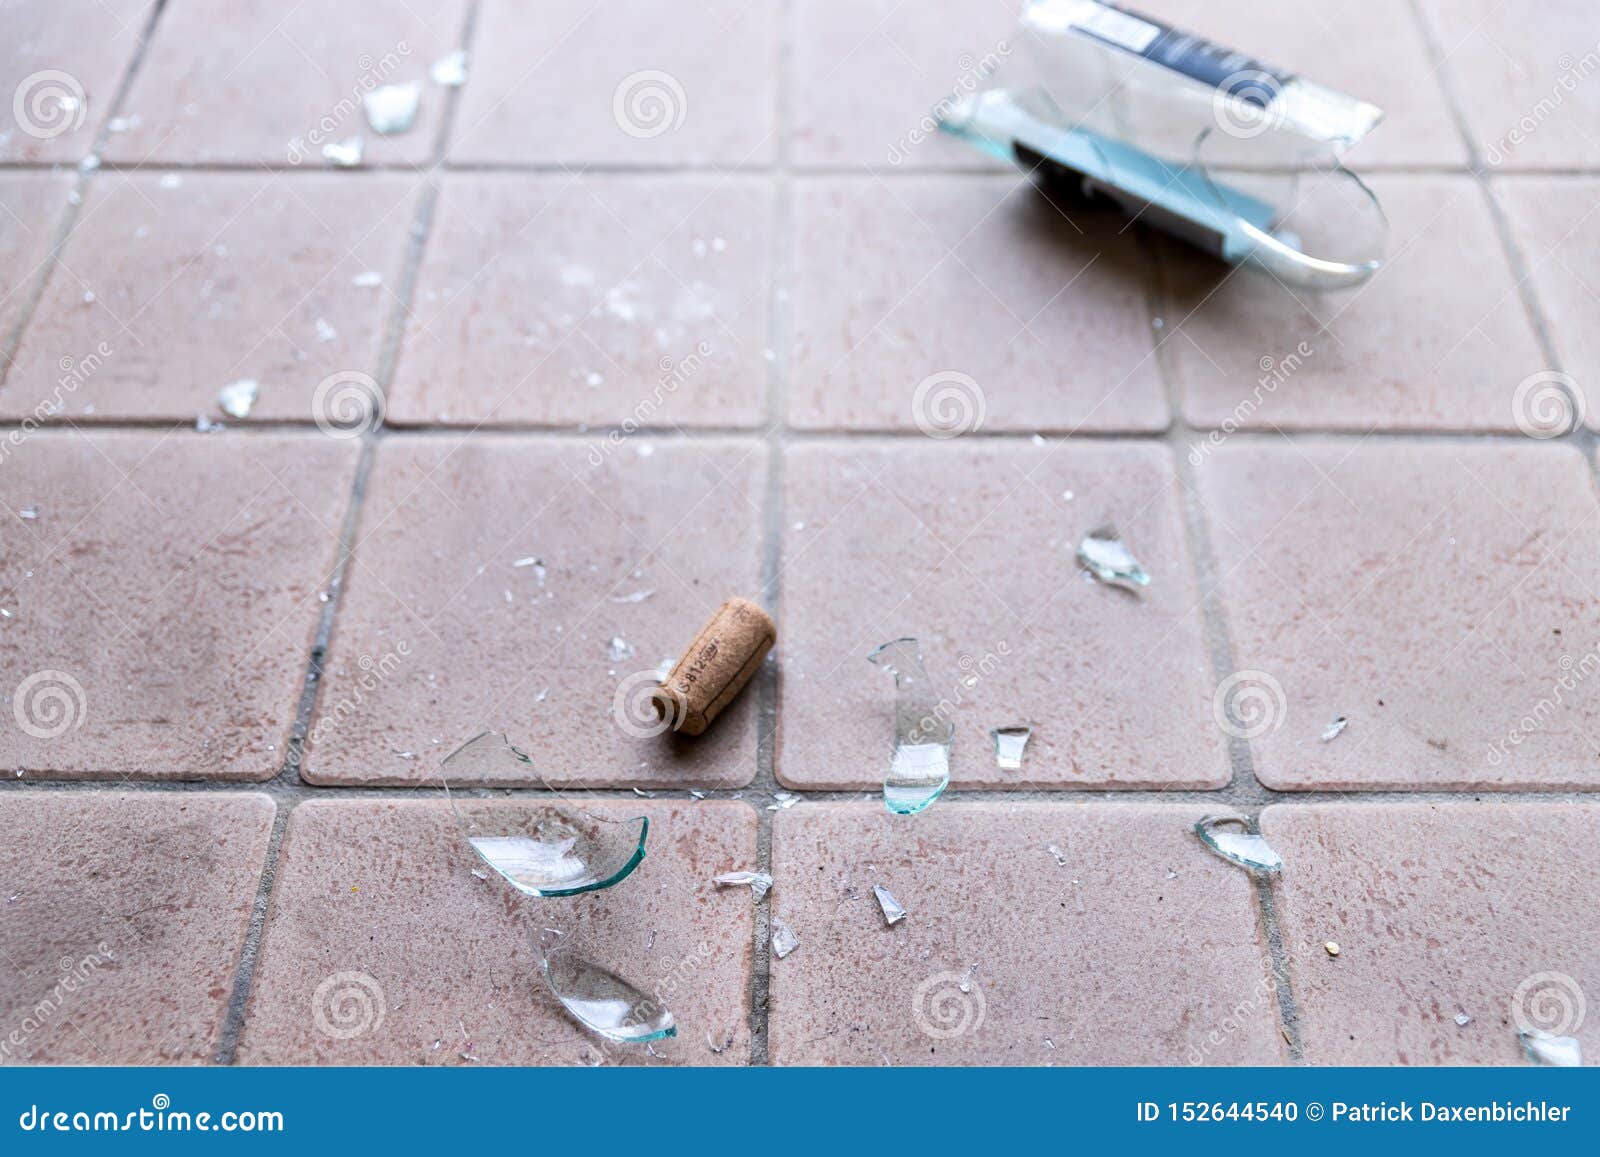 broken glass on the floor, alcohol abuse